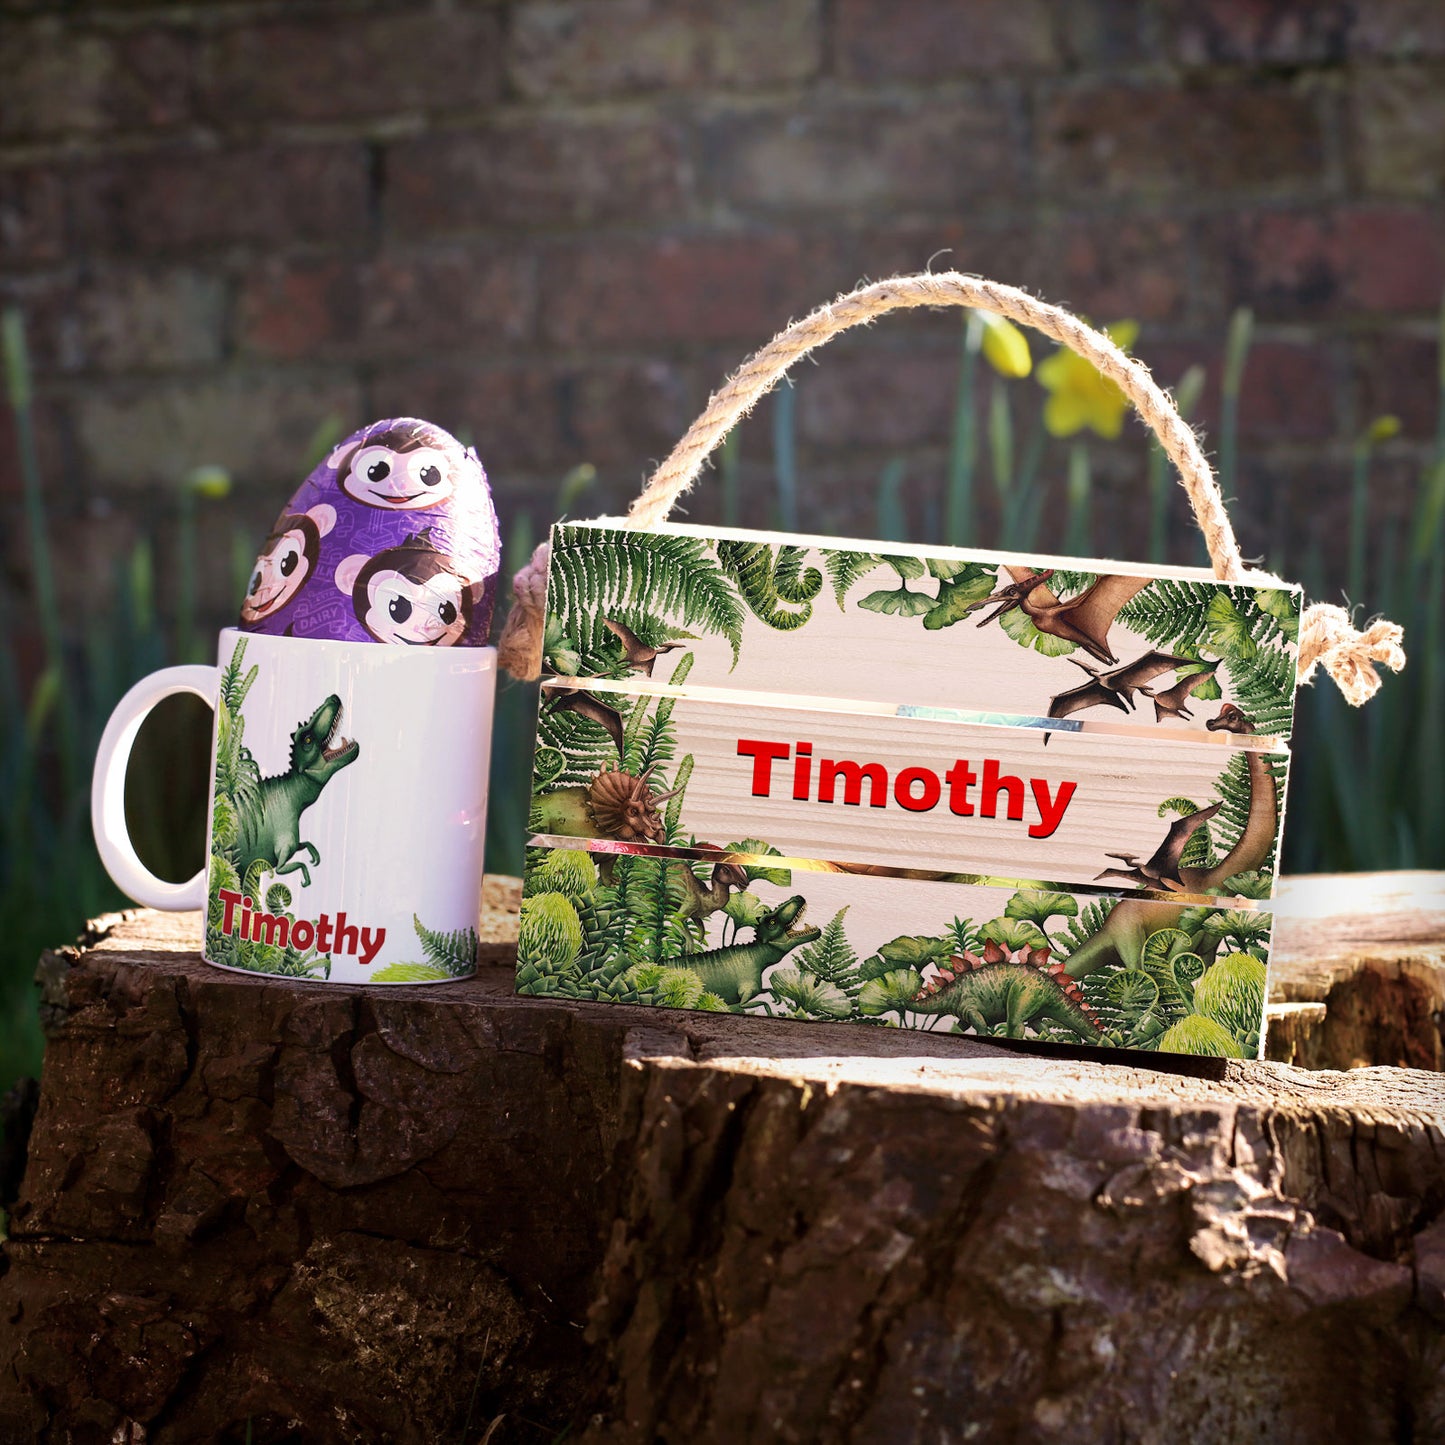 Personalised Easter Basket Gift Hamper with Jurassic Dinosaurs